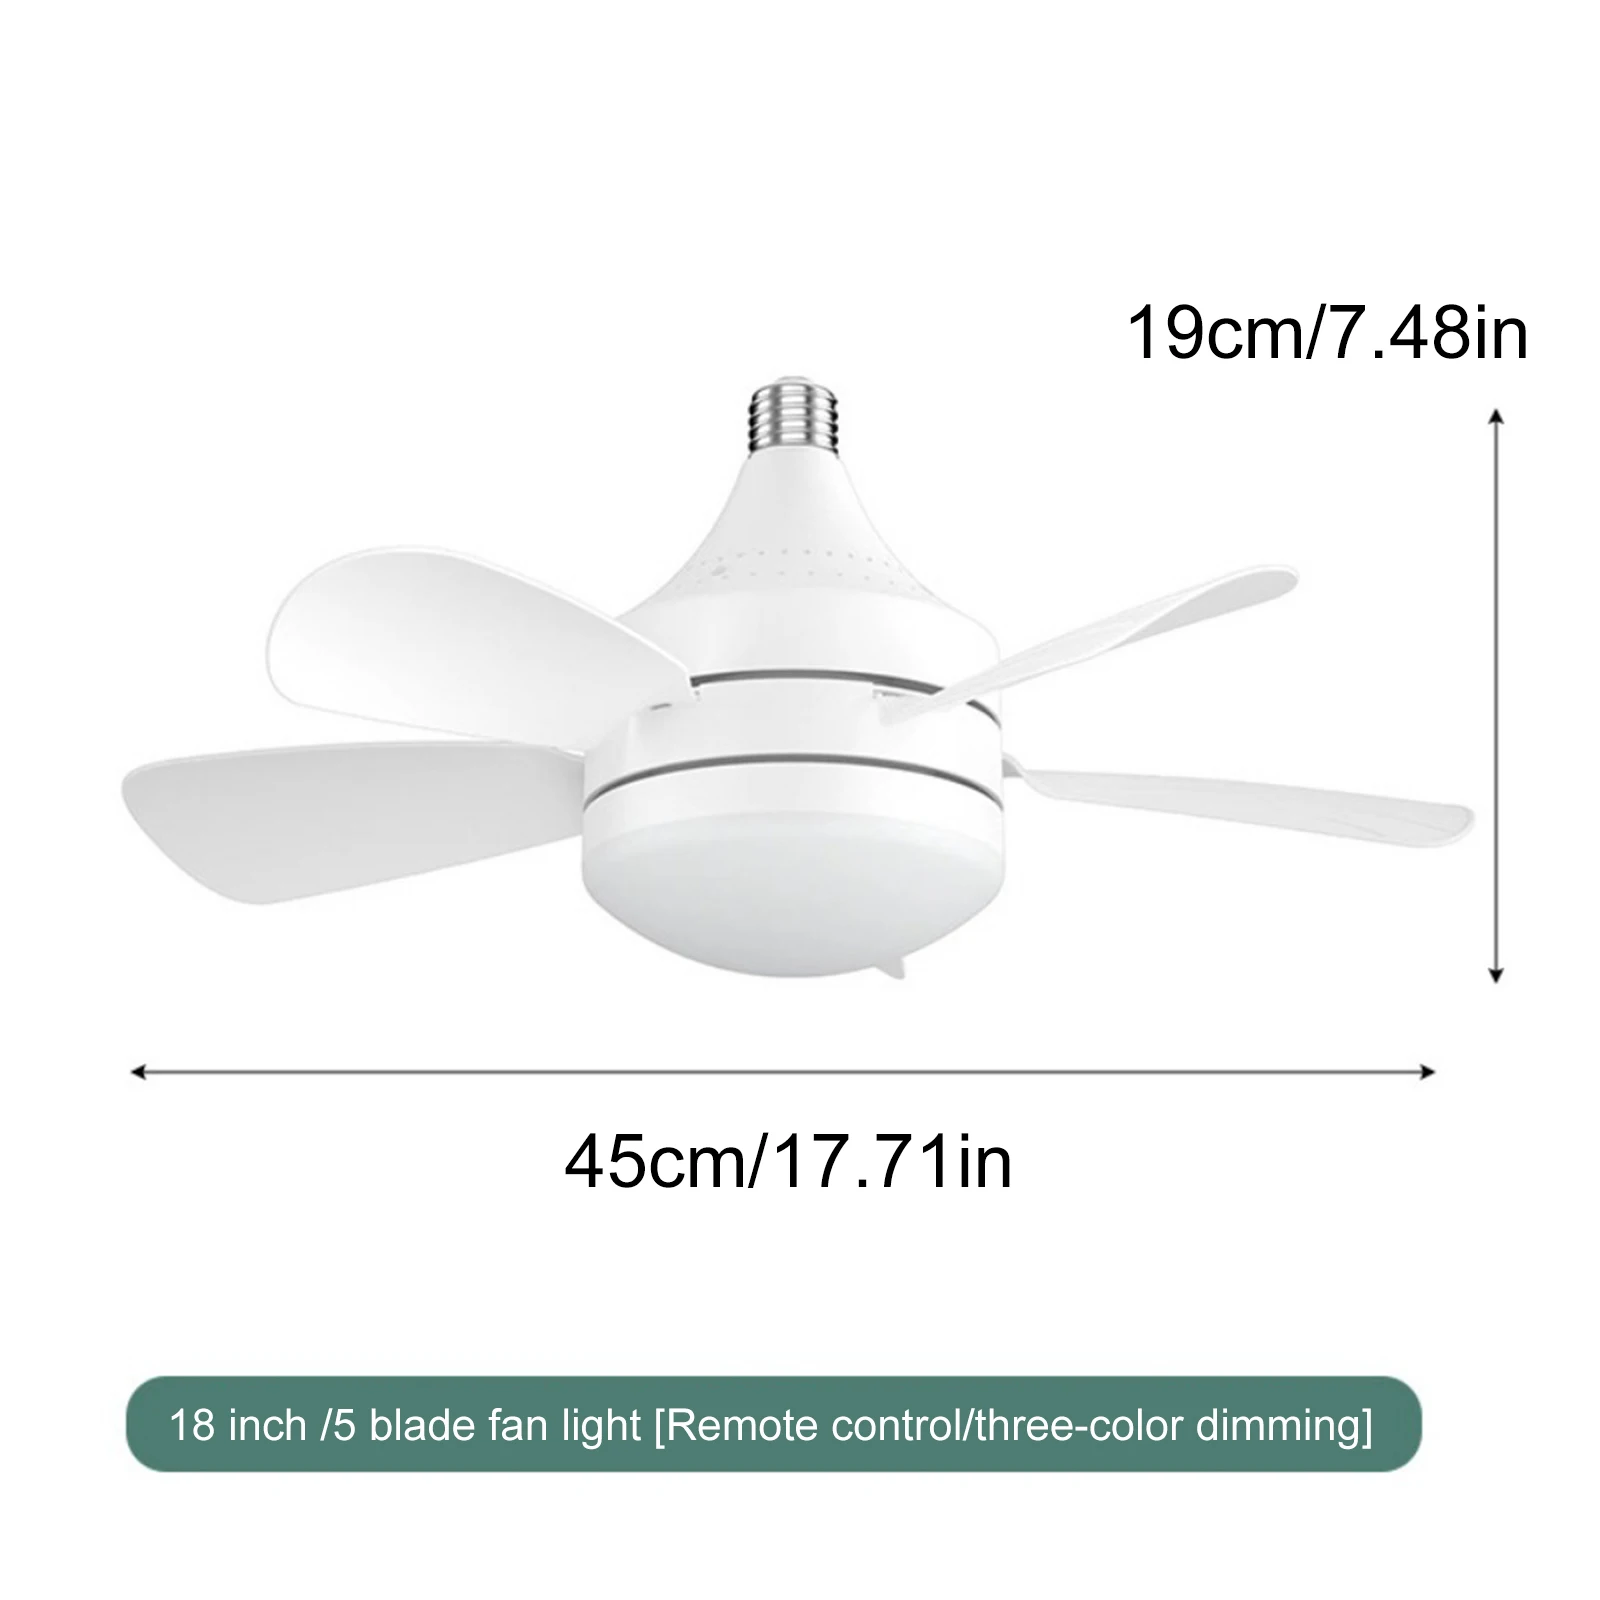 

Sleek Ceiling Fan with Built-In Light and Remote - 3 Speeds, Timer Settings, Indoor Flush Mount, No Wiring Needed